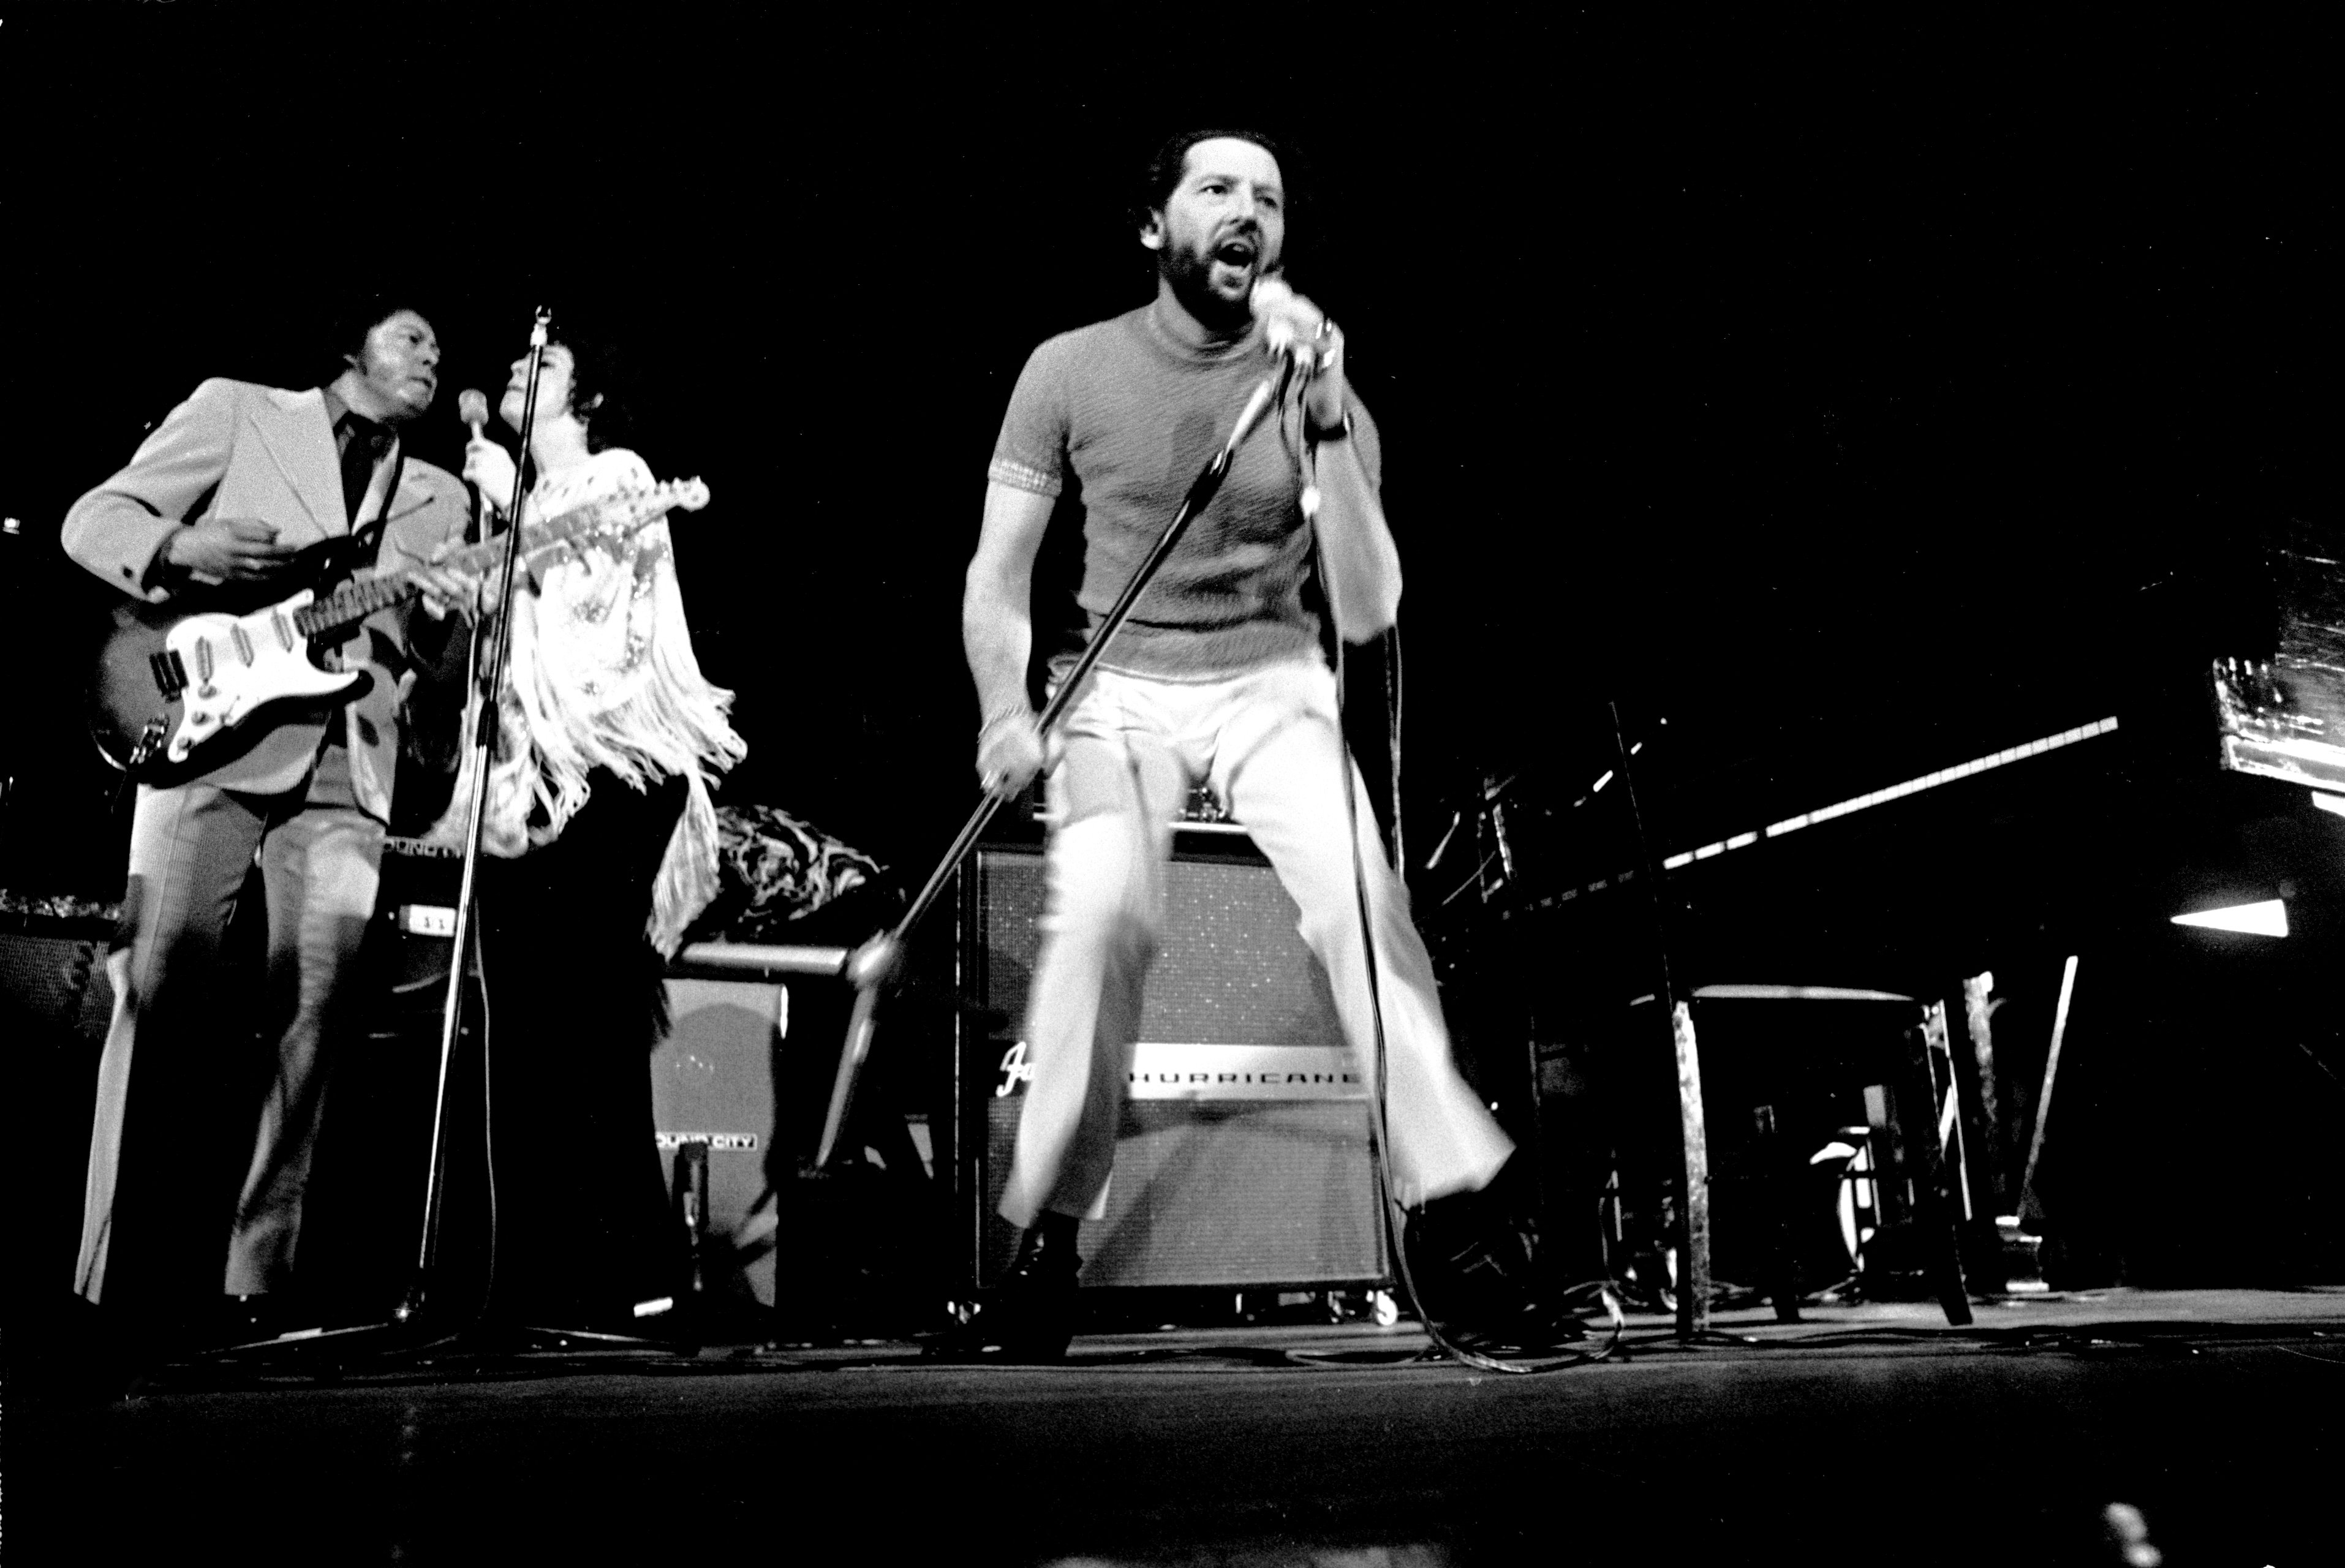 Jerry Lee Lewis performs at The Concertgebouw in Amsterdam, Holland on January 1, 1972 | Source: Getty Images